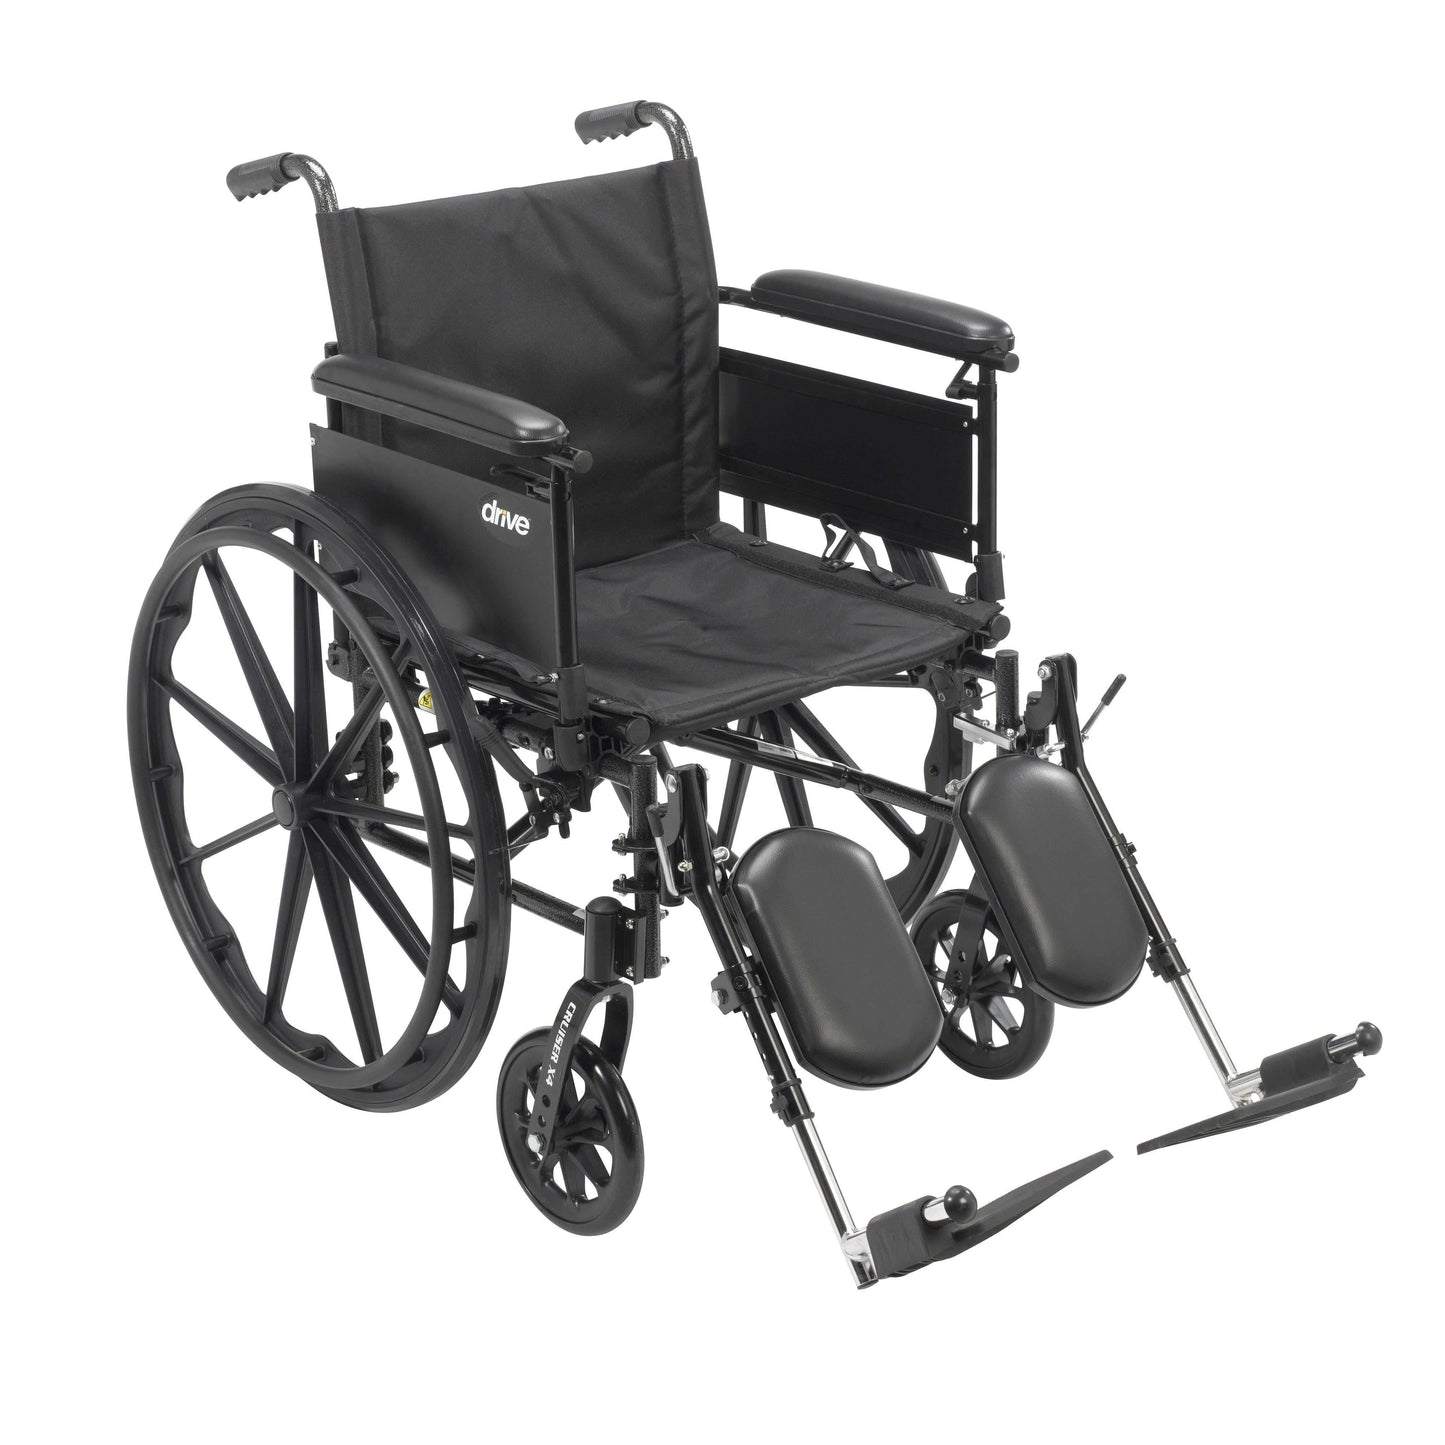 Drive cx418adfa-elr Cruiser X4 Lightweight Dual Axle Wheelchair with Adjustable Detachable Arms, Full Arms, Elevating Leg Rests, 18" Seat